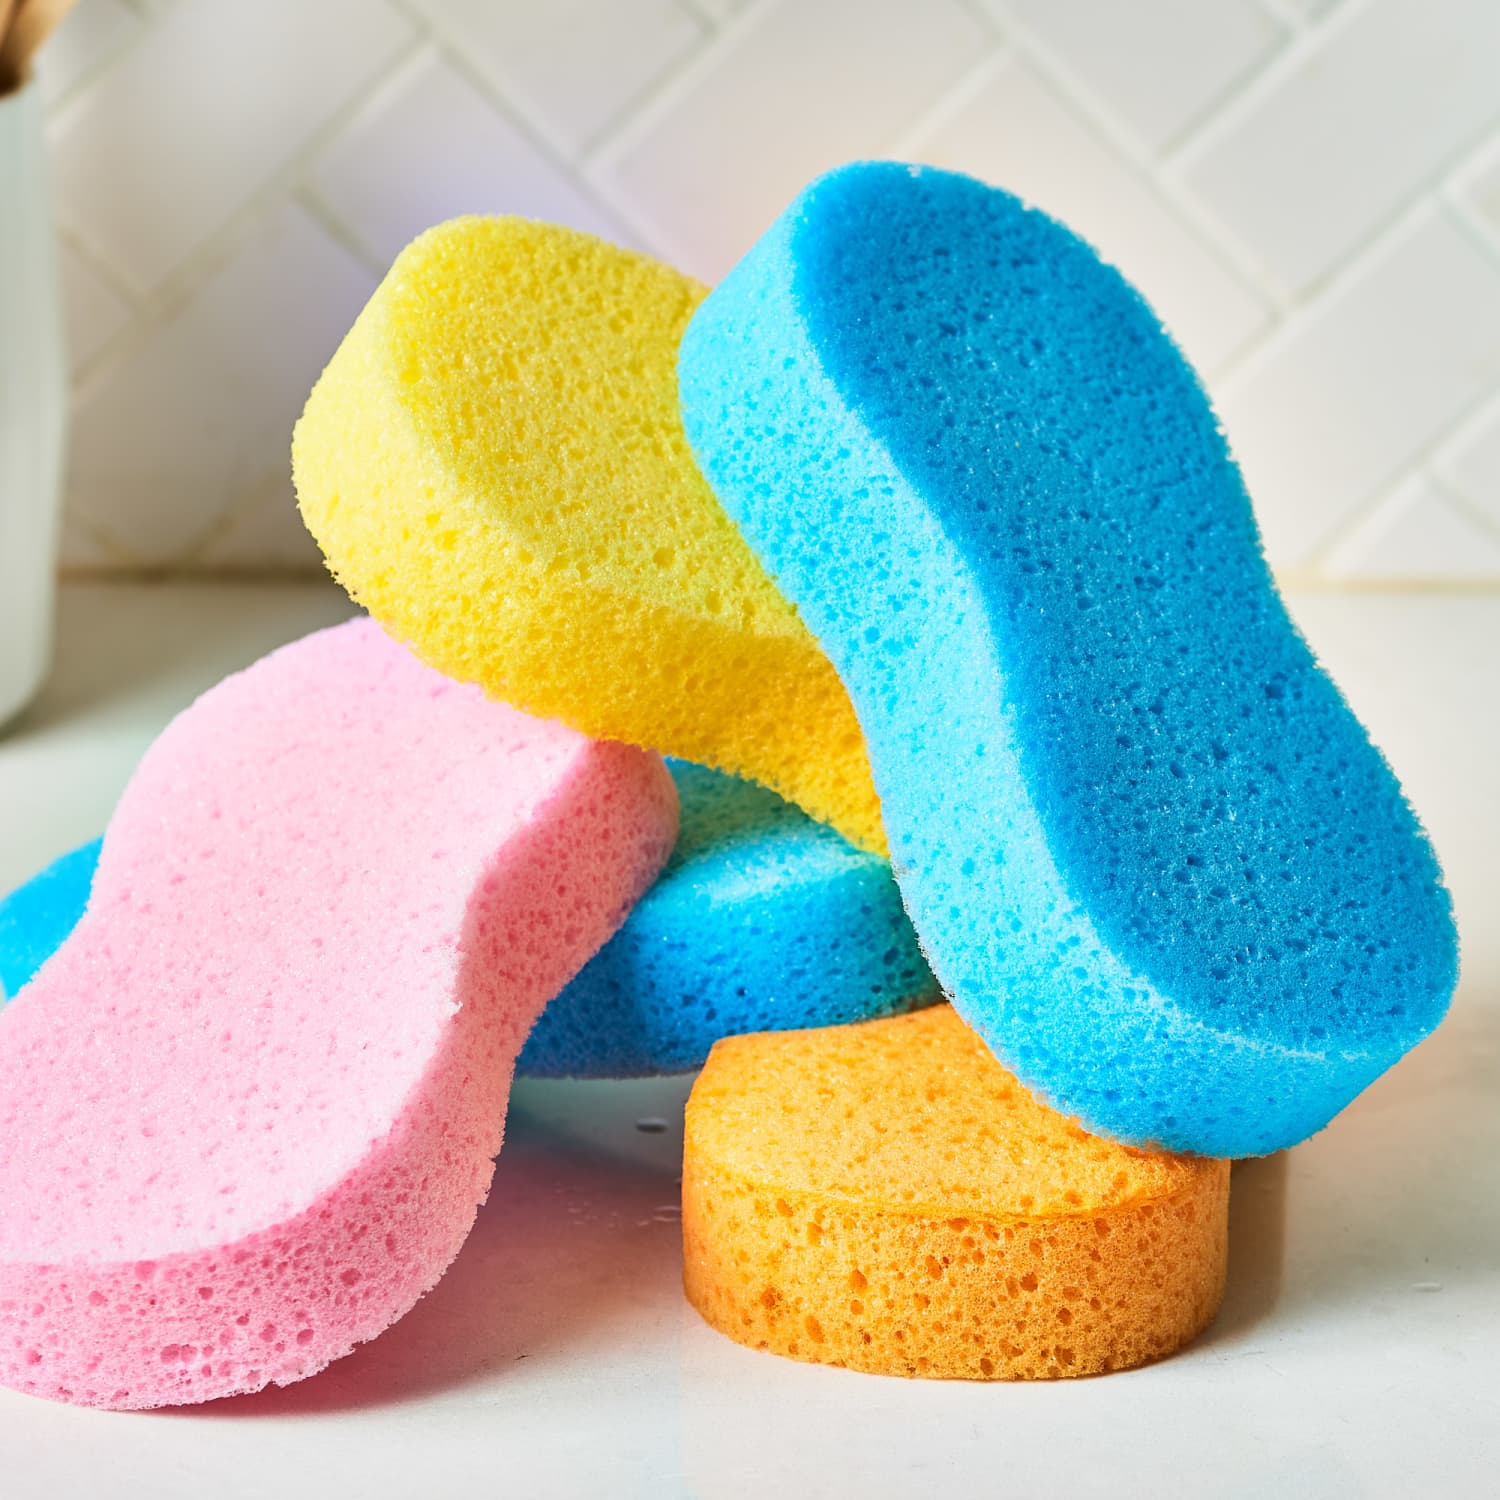 11 Surprising Ways to Use Sponges (Other than Washing Dishes